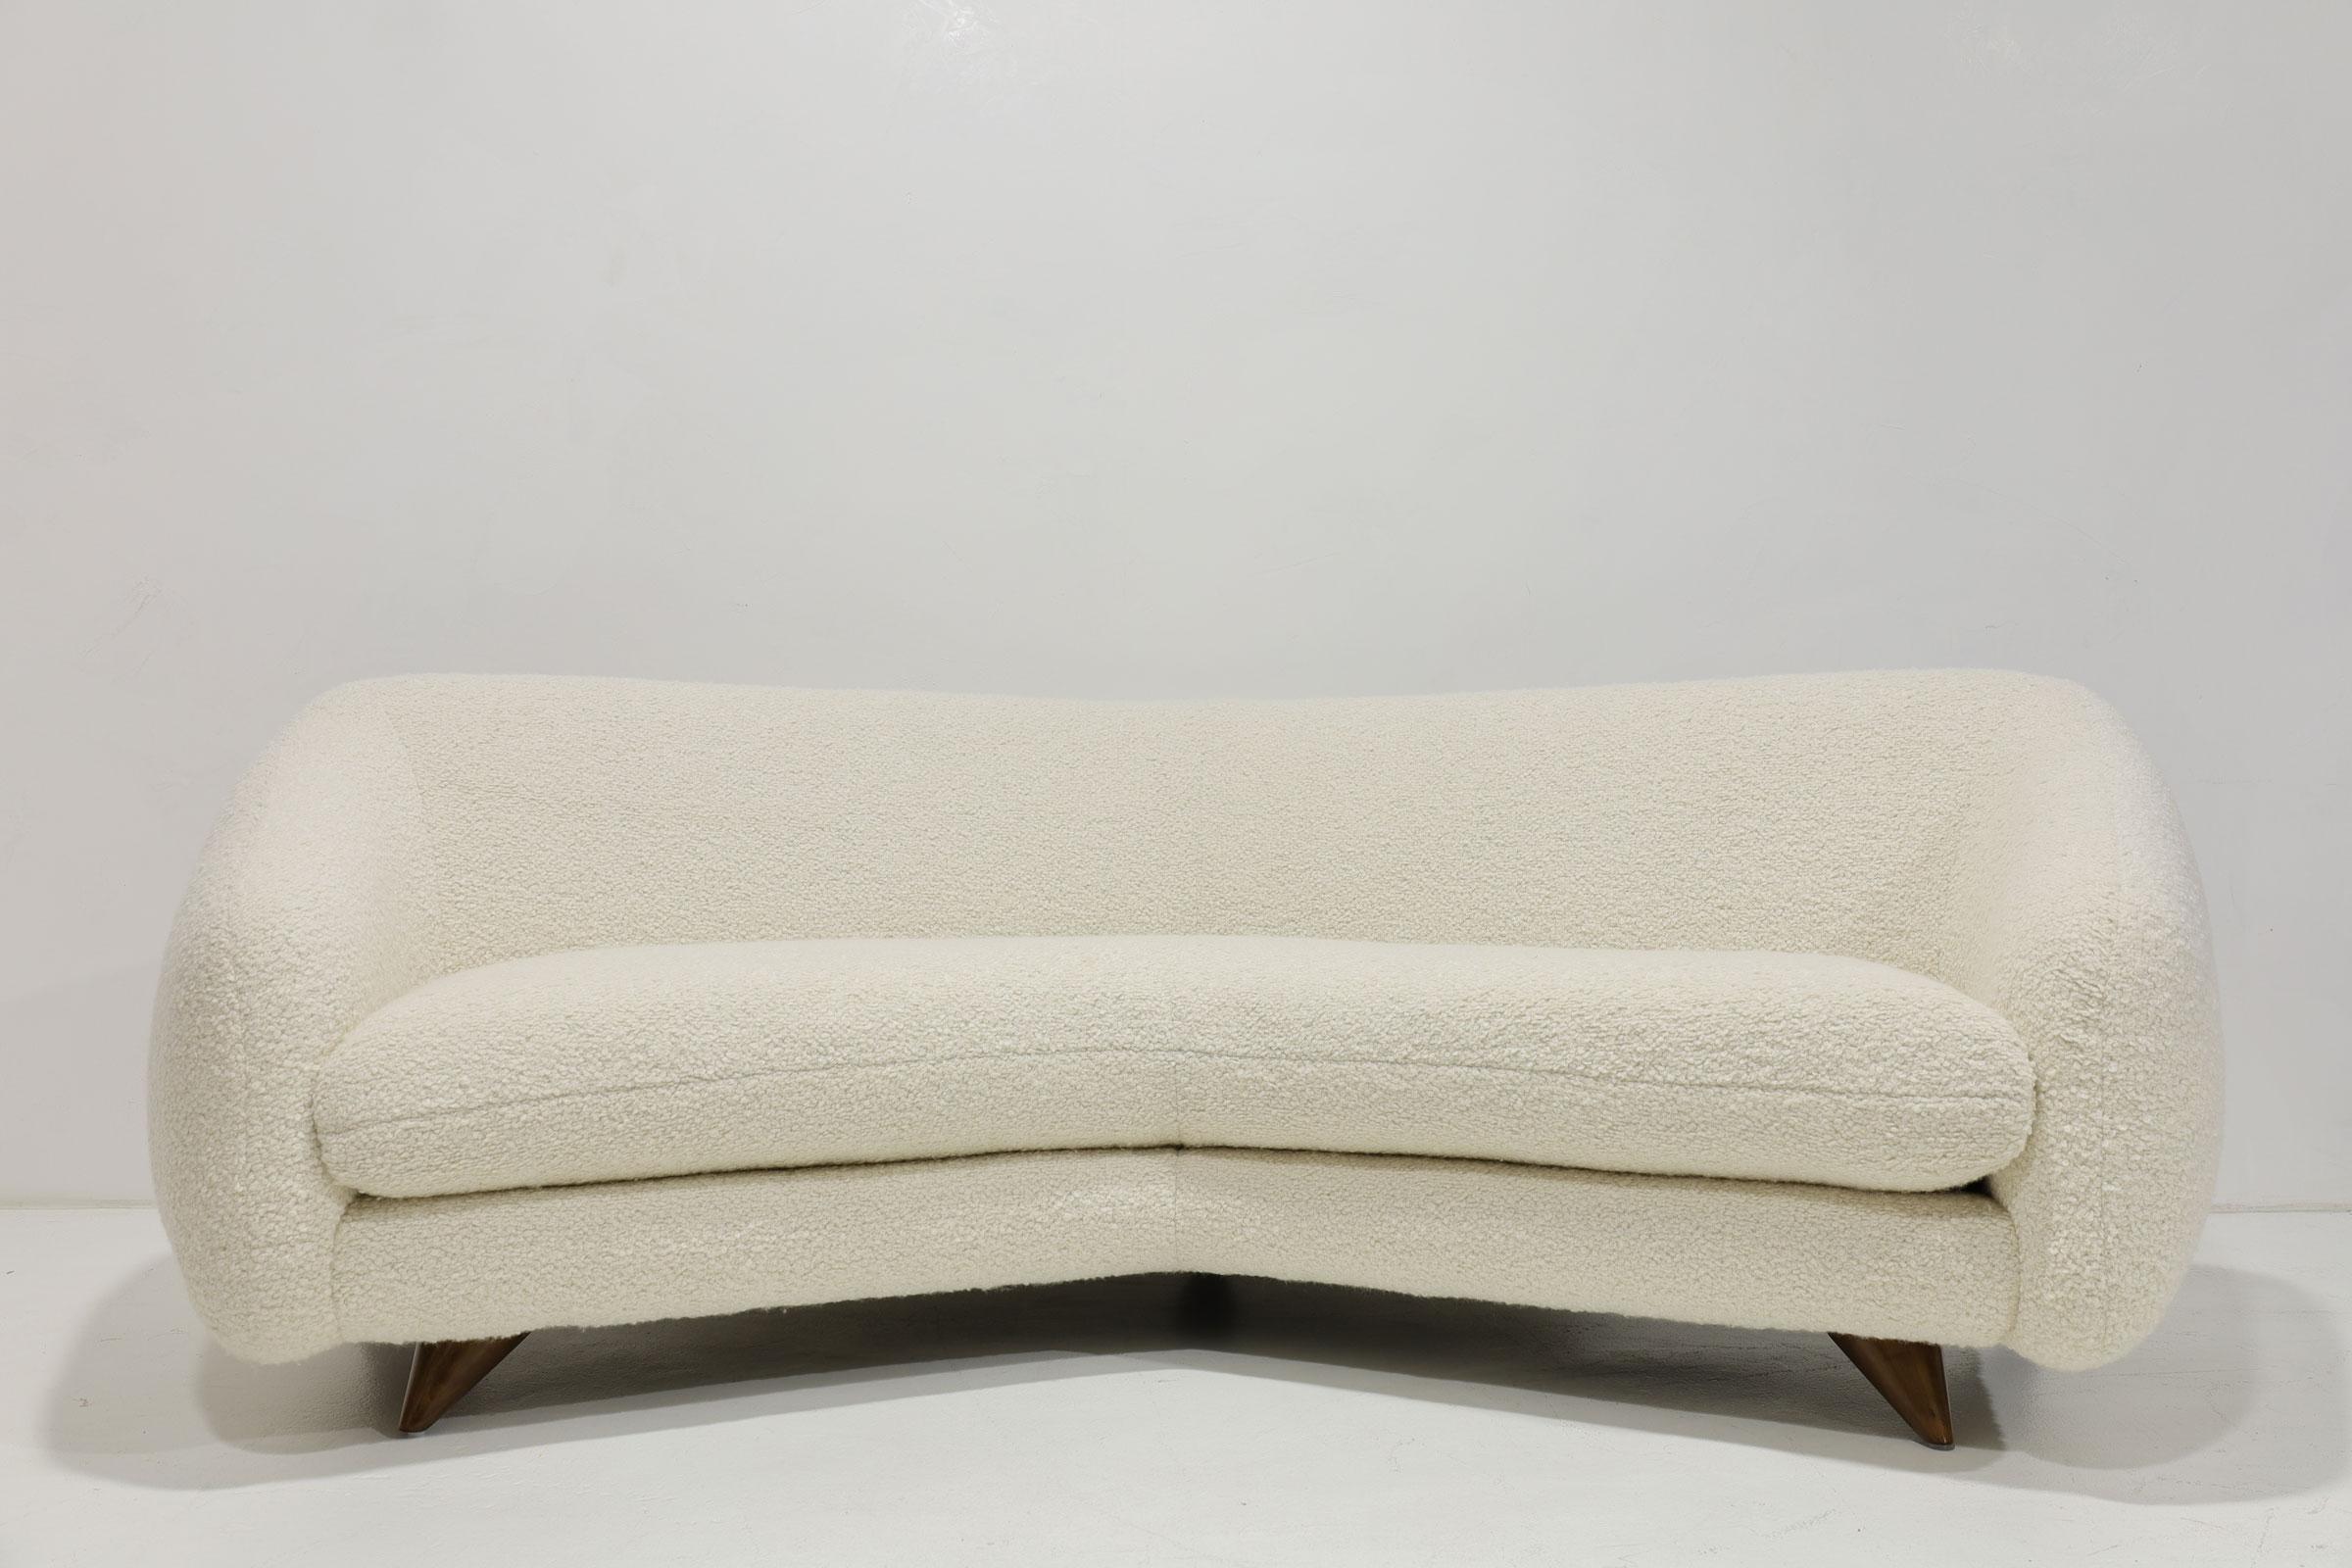 A beautiful and comfortable sofa by Vladimir Kagan for Kagan-Dreyfuss. Sometimes called the Wide Angle sofa or Tangent Sofa. We have a pair and have reupholstered in Holly Hunt Teddy. The sofa(s) are stunning.  